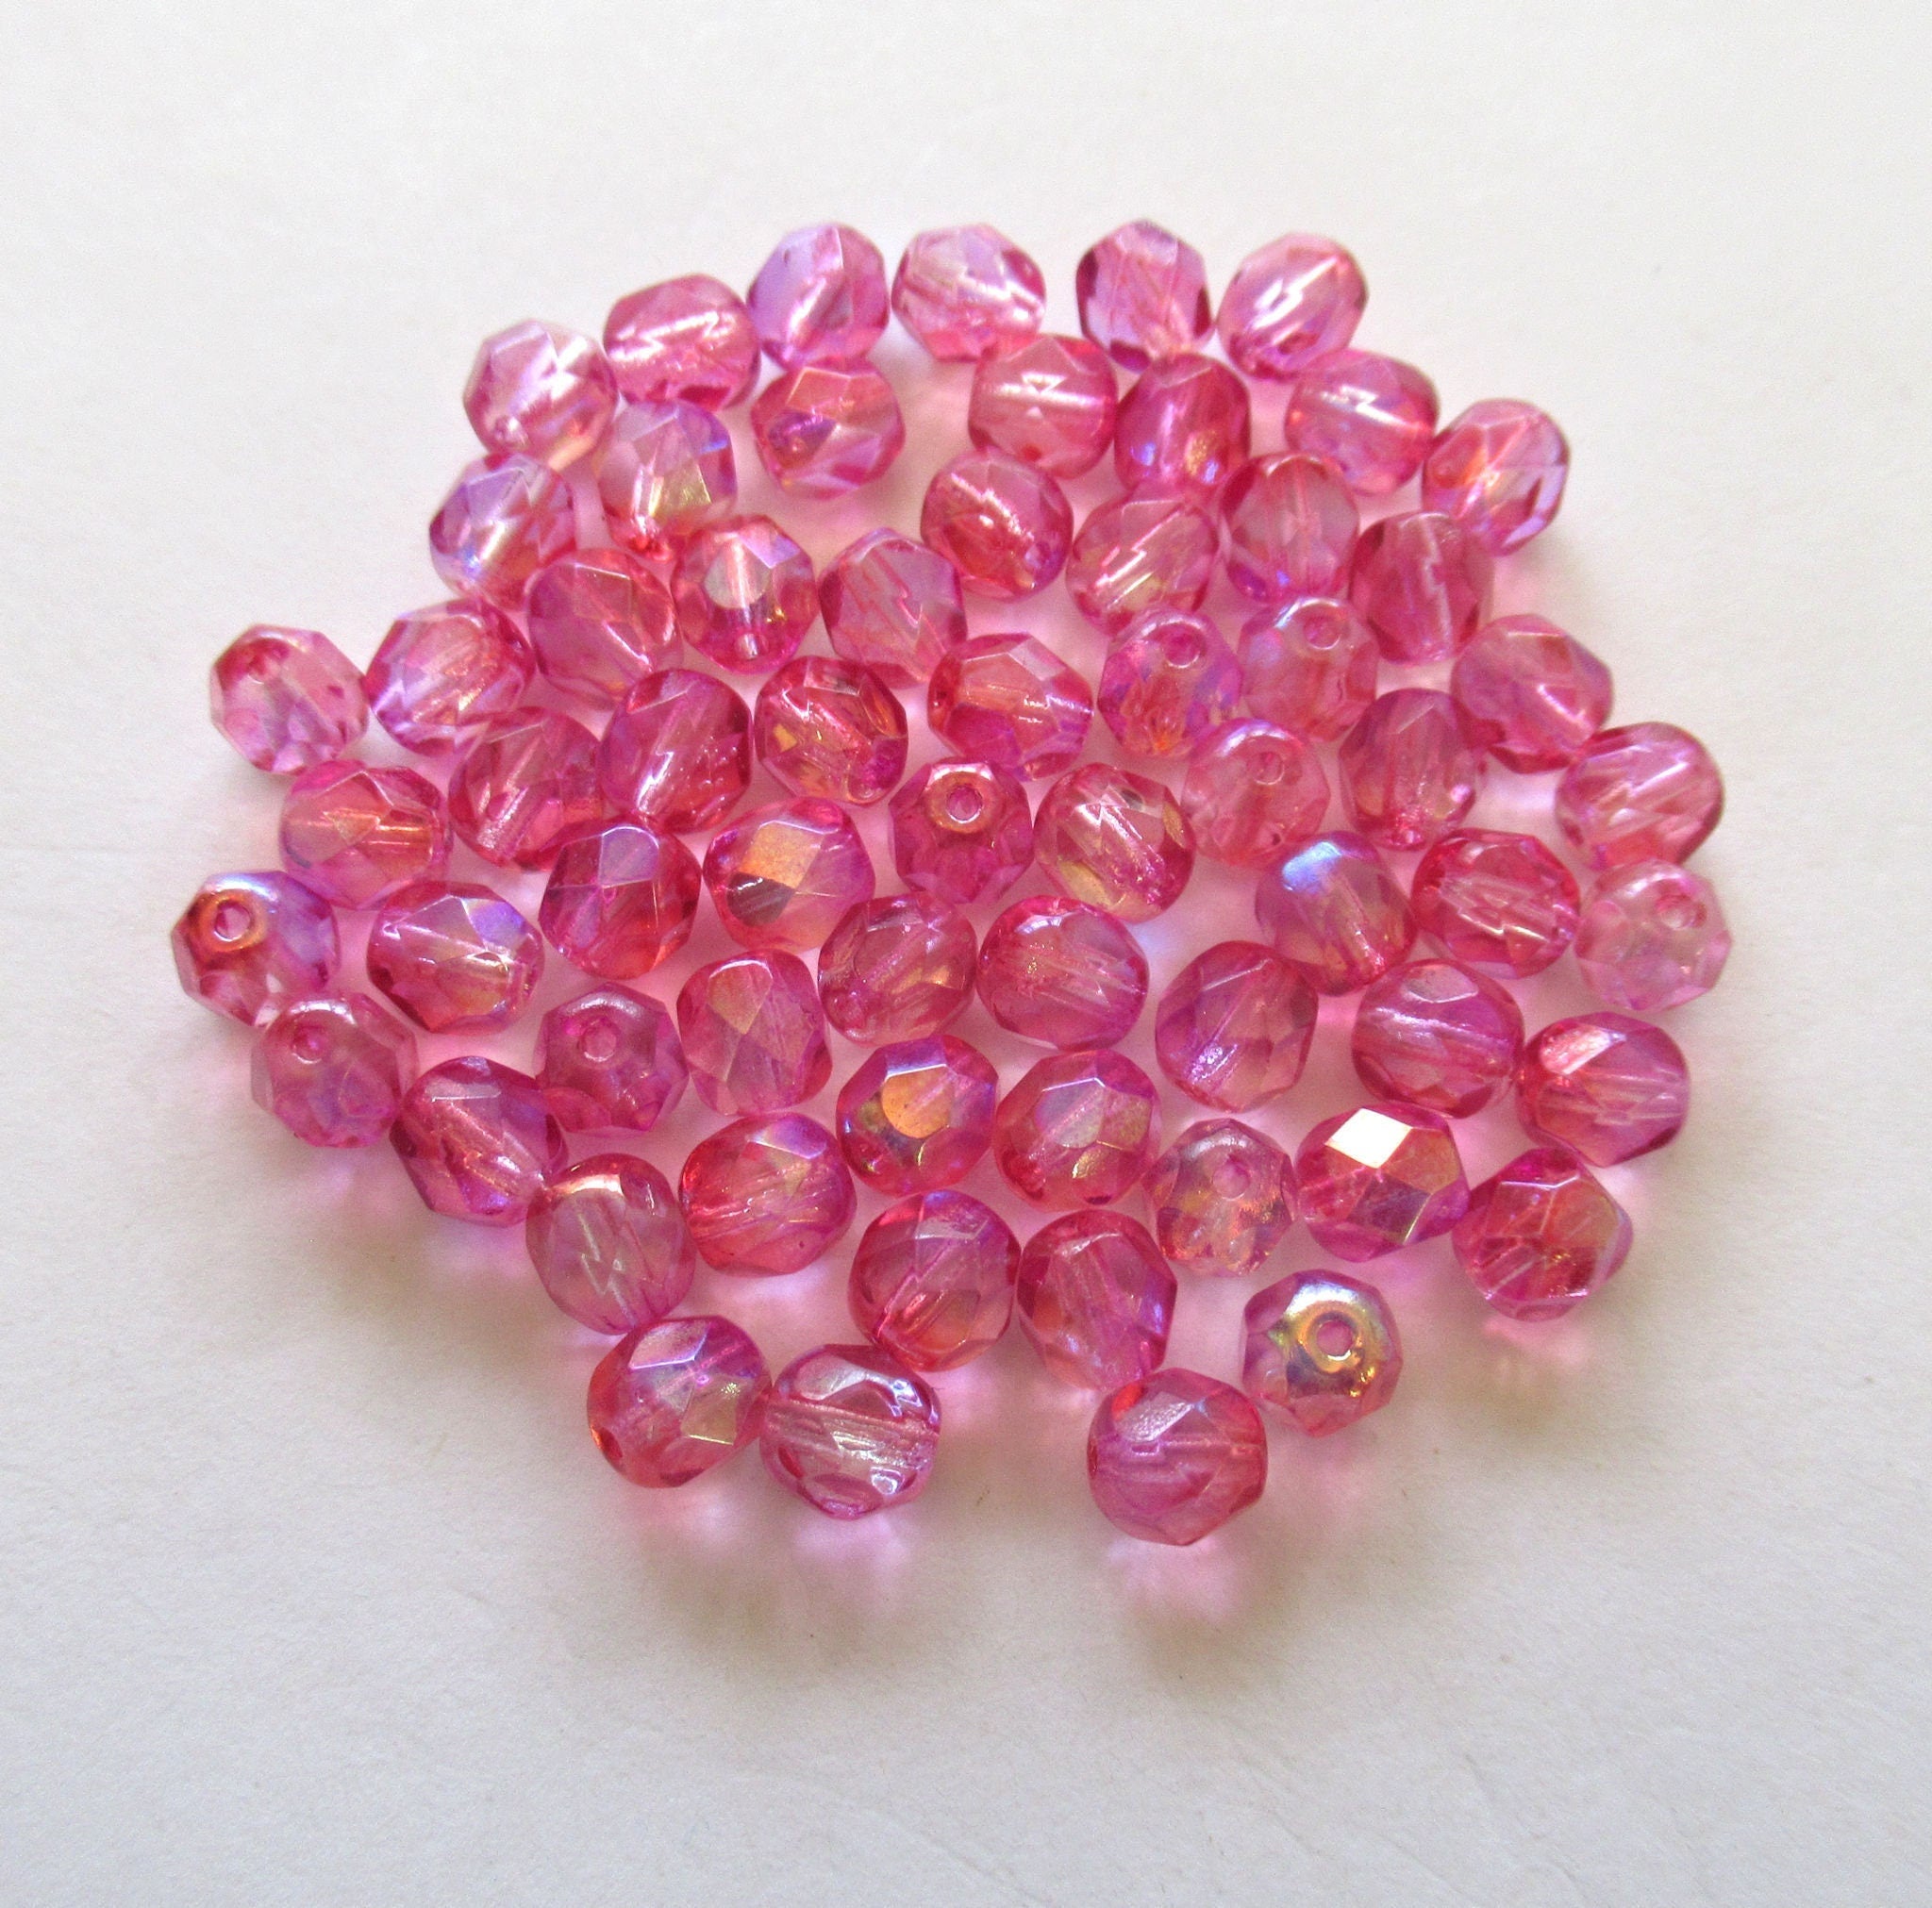 SALE--6mm Pink Glass Beads, 6mm Glass Beads, 6mm Marble Beads, 6mm Mini  Beads